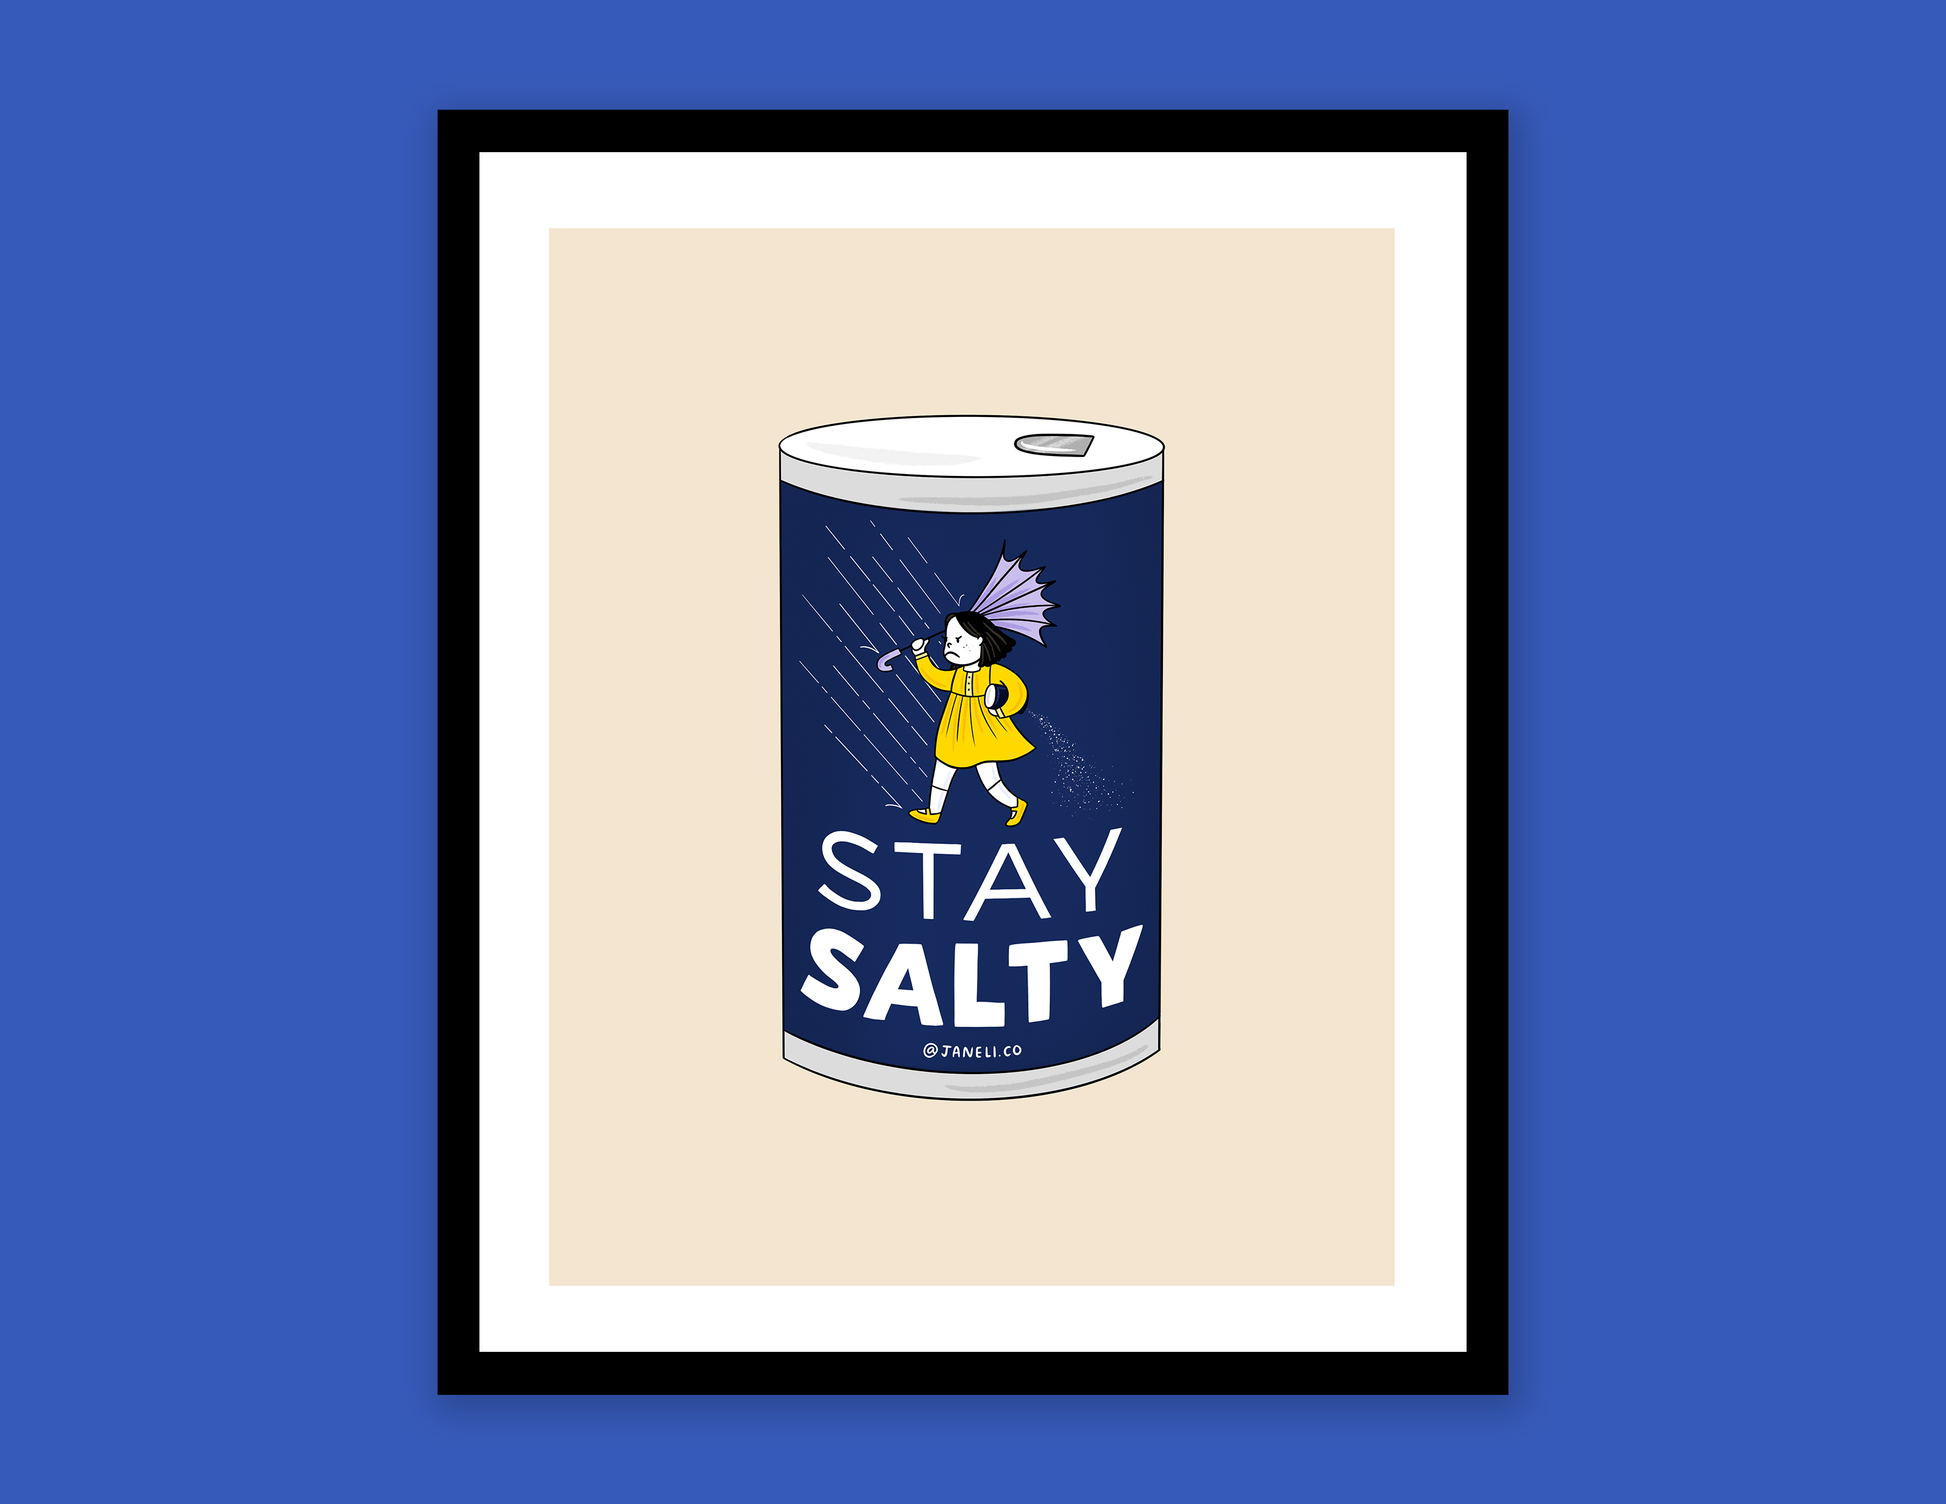 A digital mock of a framed JaneLi.Co print that shows a grumpy salt girl spilling a can of salt in the rain over a navy background.